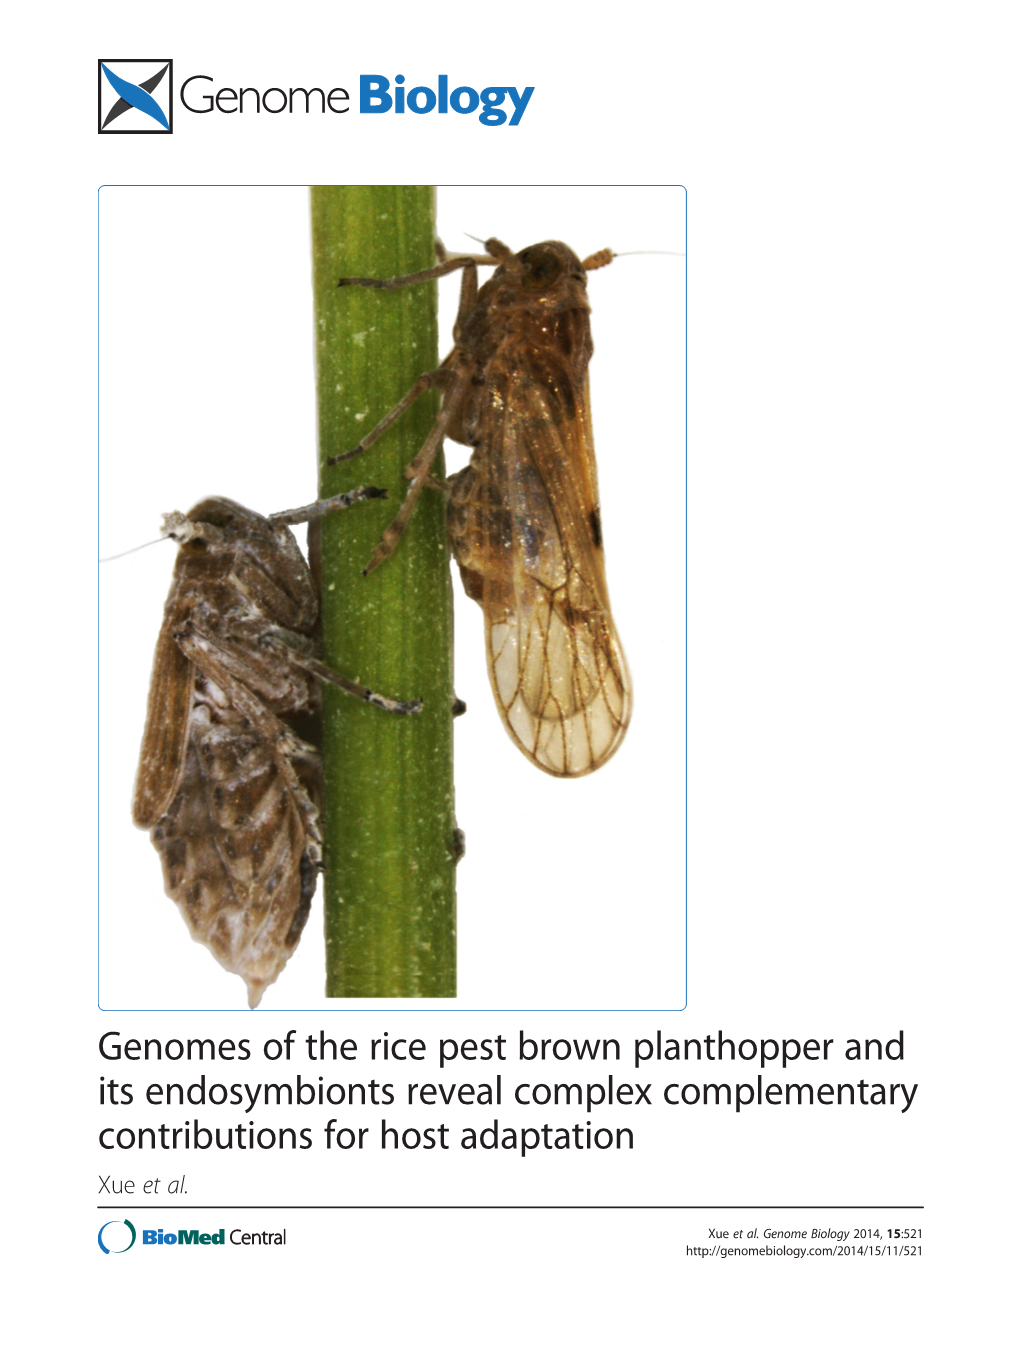 Genomes of the Rice Pest Brown Planthopper and Its Endosymbionts Reveal Complex Complementary Contributions for Host Adaptation Xue Et Al